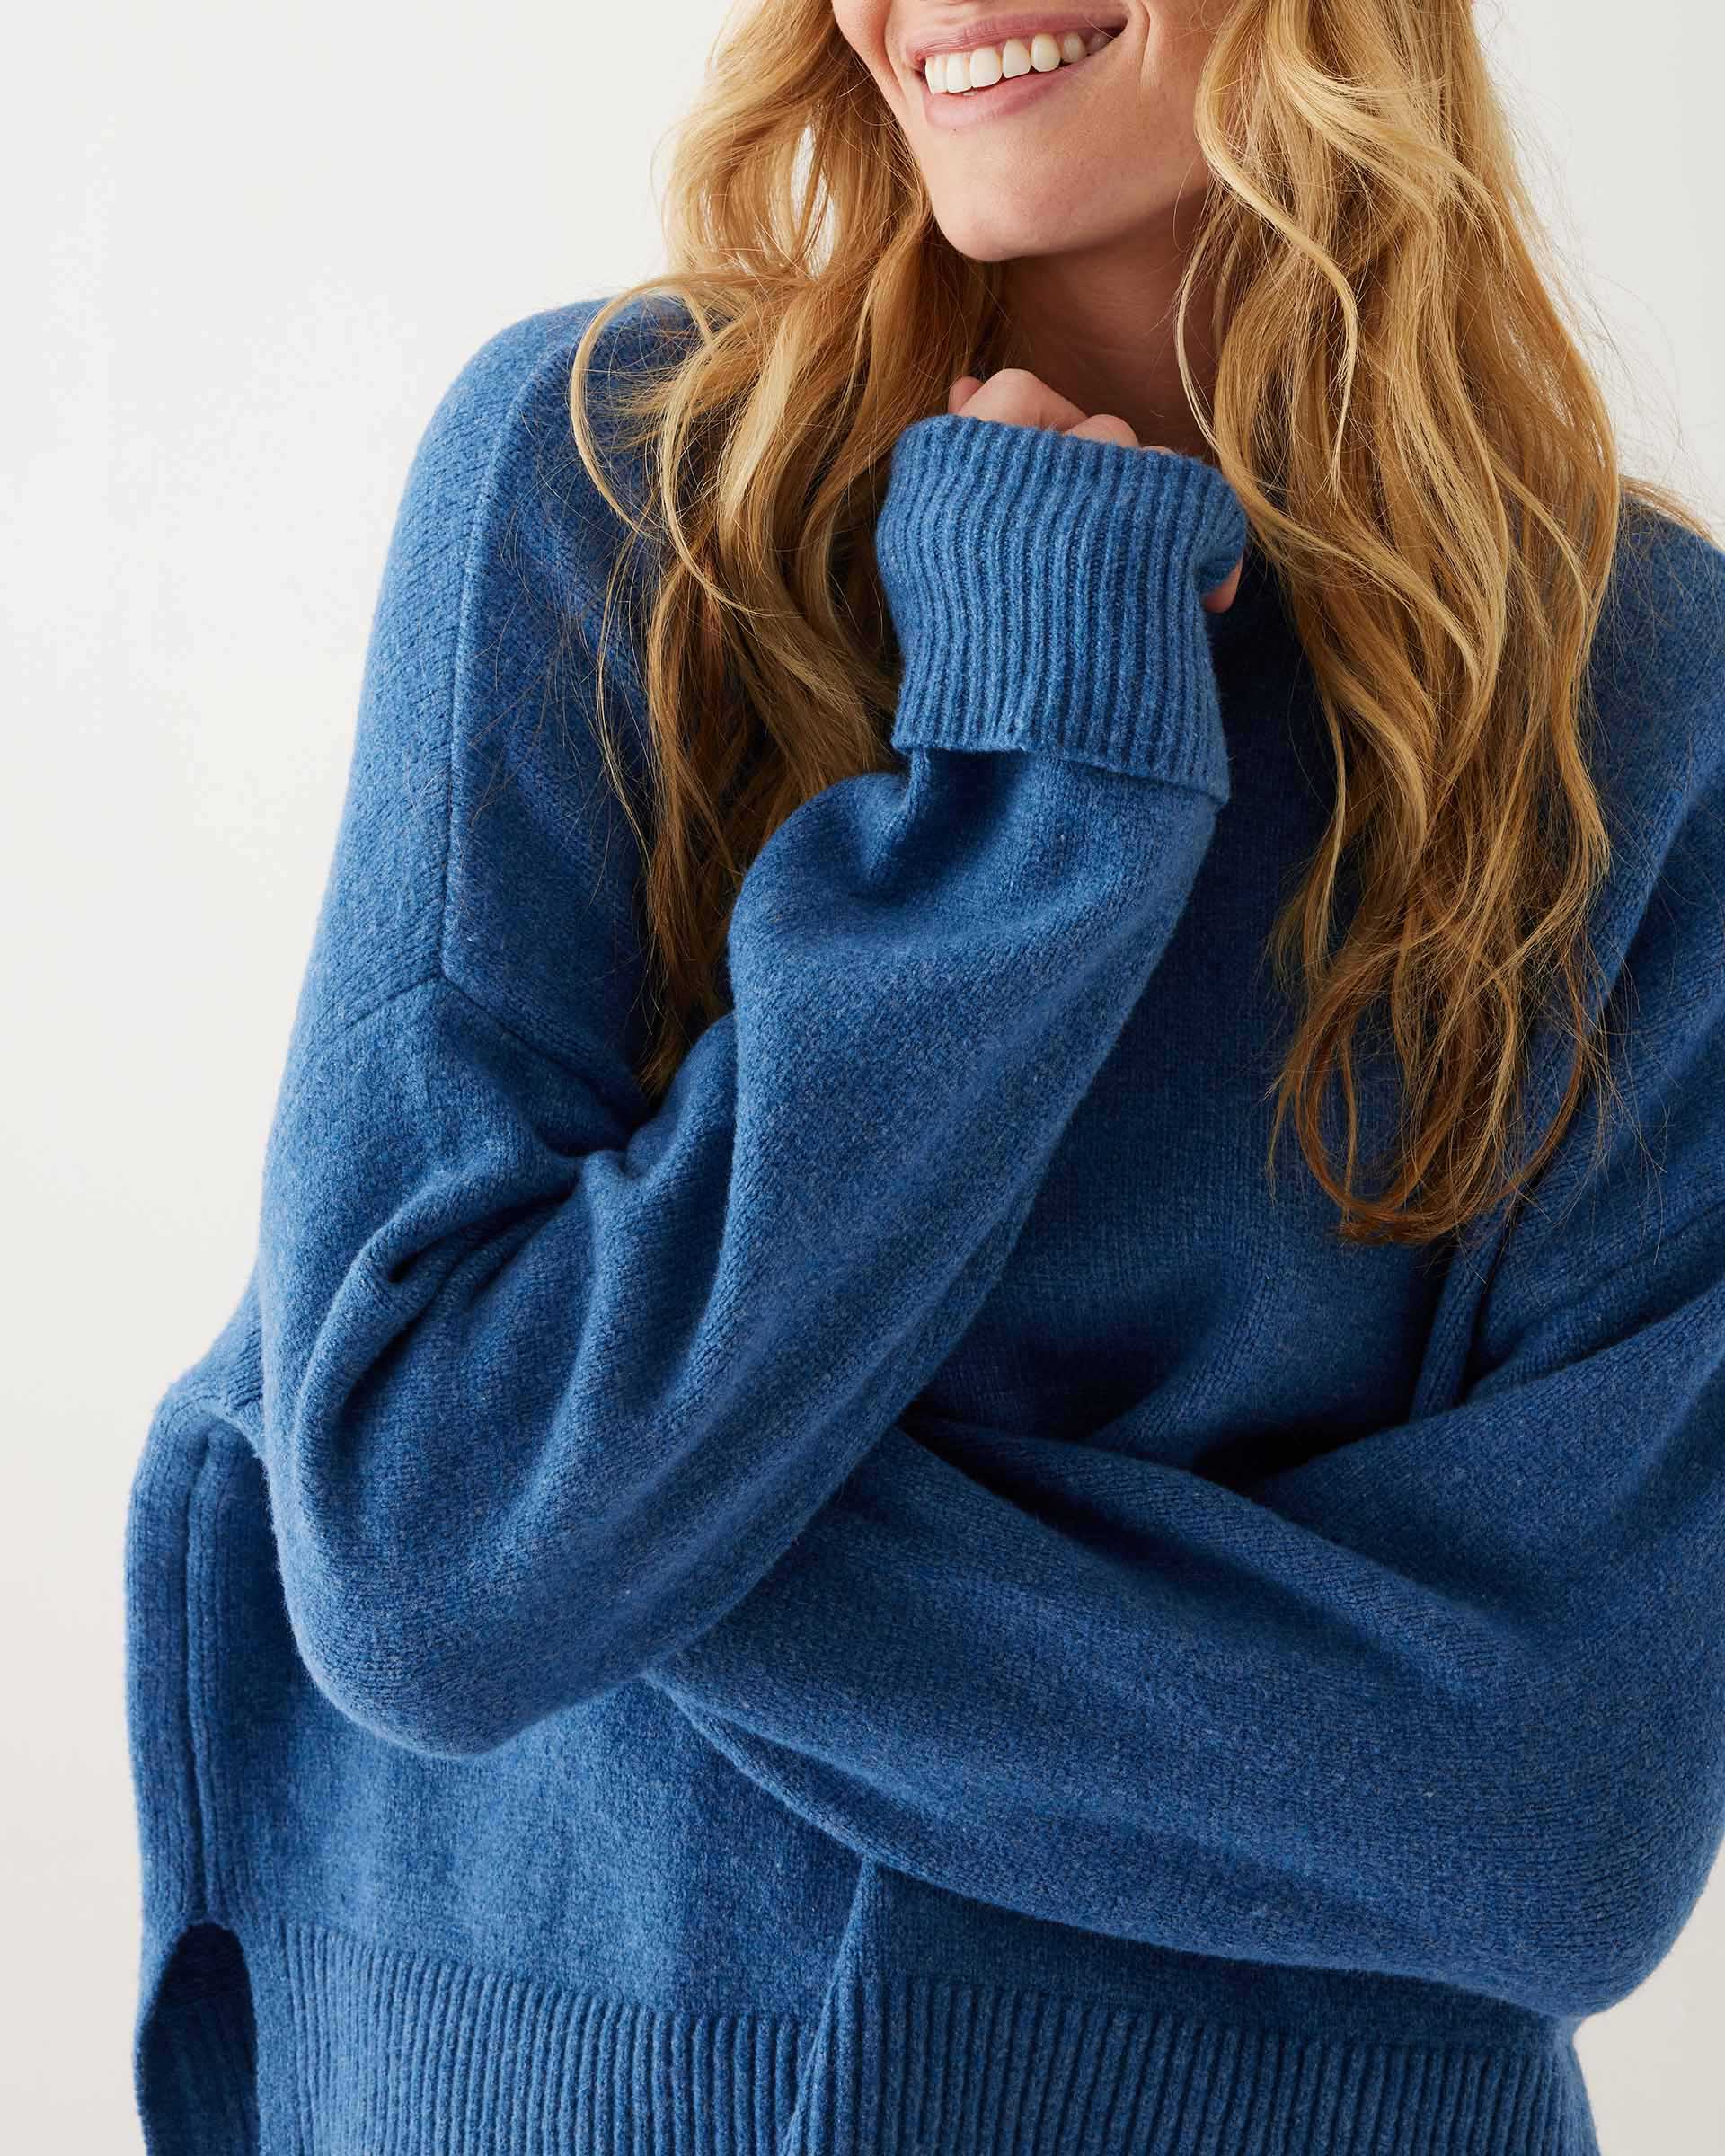 closeup of female wearing denim blue crewneck sweater standing in front of a white background